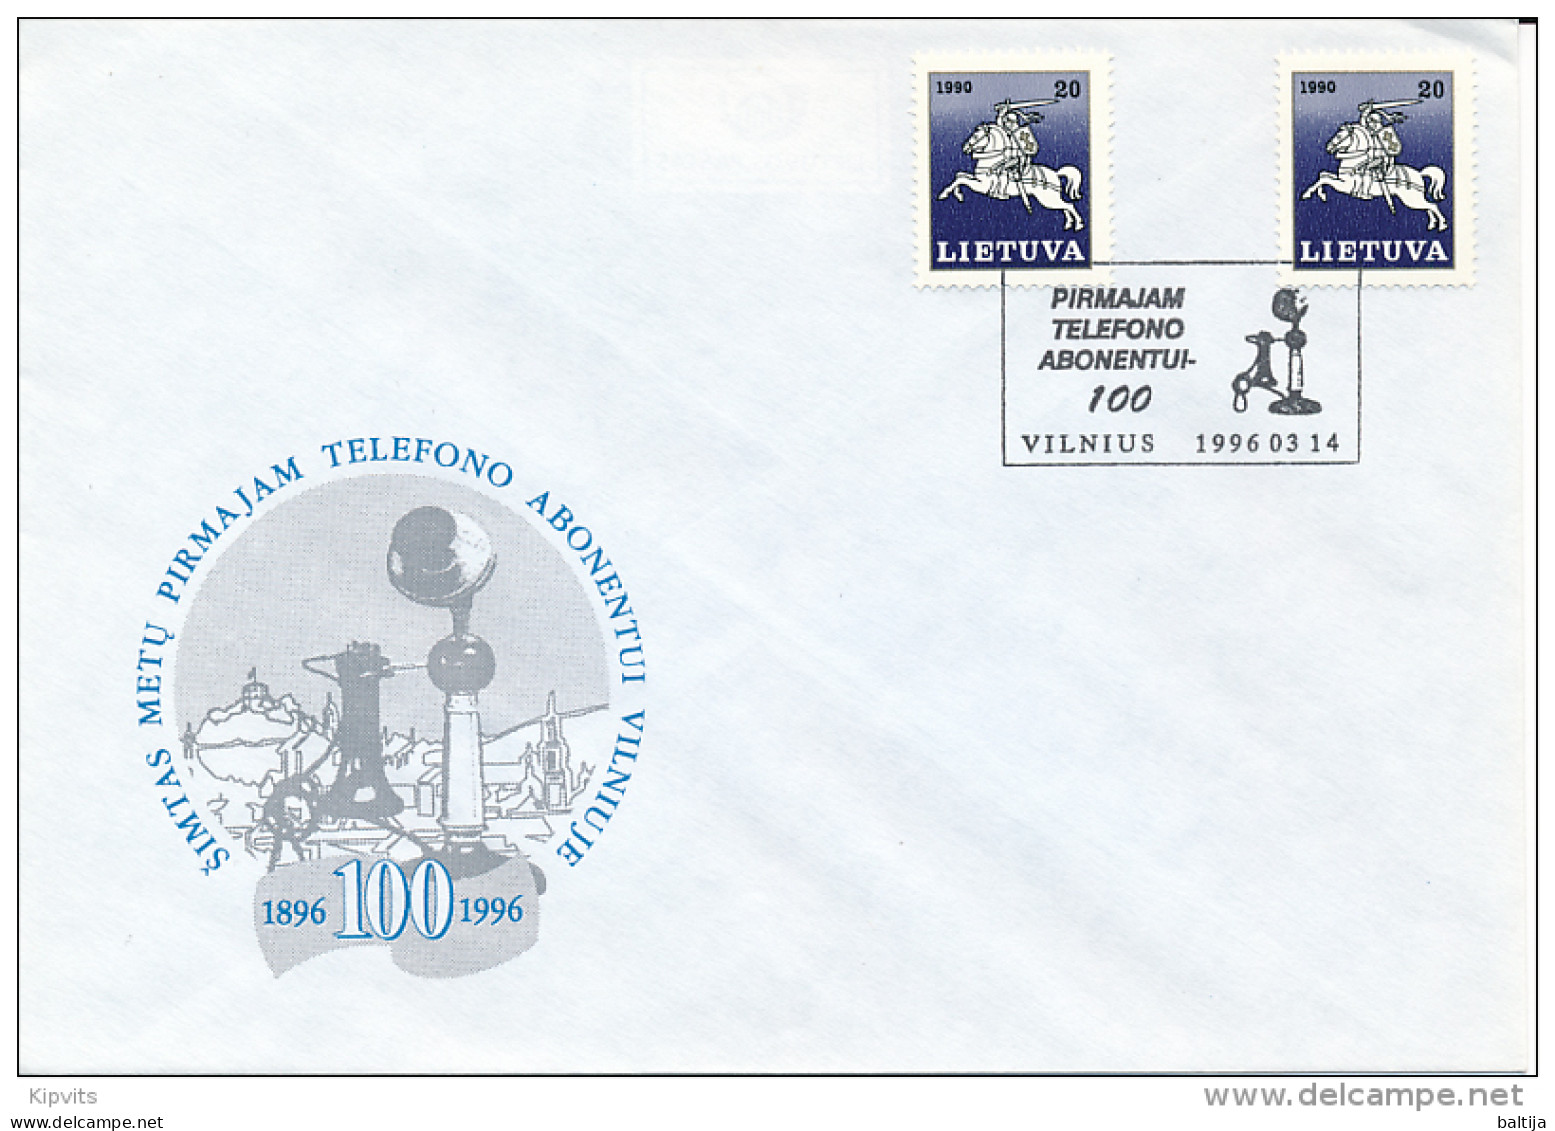 Special Cancellation Cover / Cachet, 1st Telephone Line 100th Anniversary - 14 March 1996 Vilnius - Lithuania